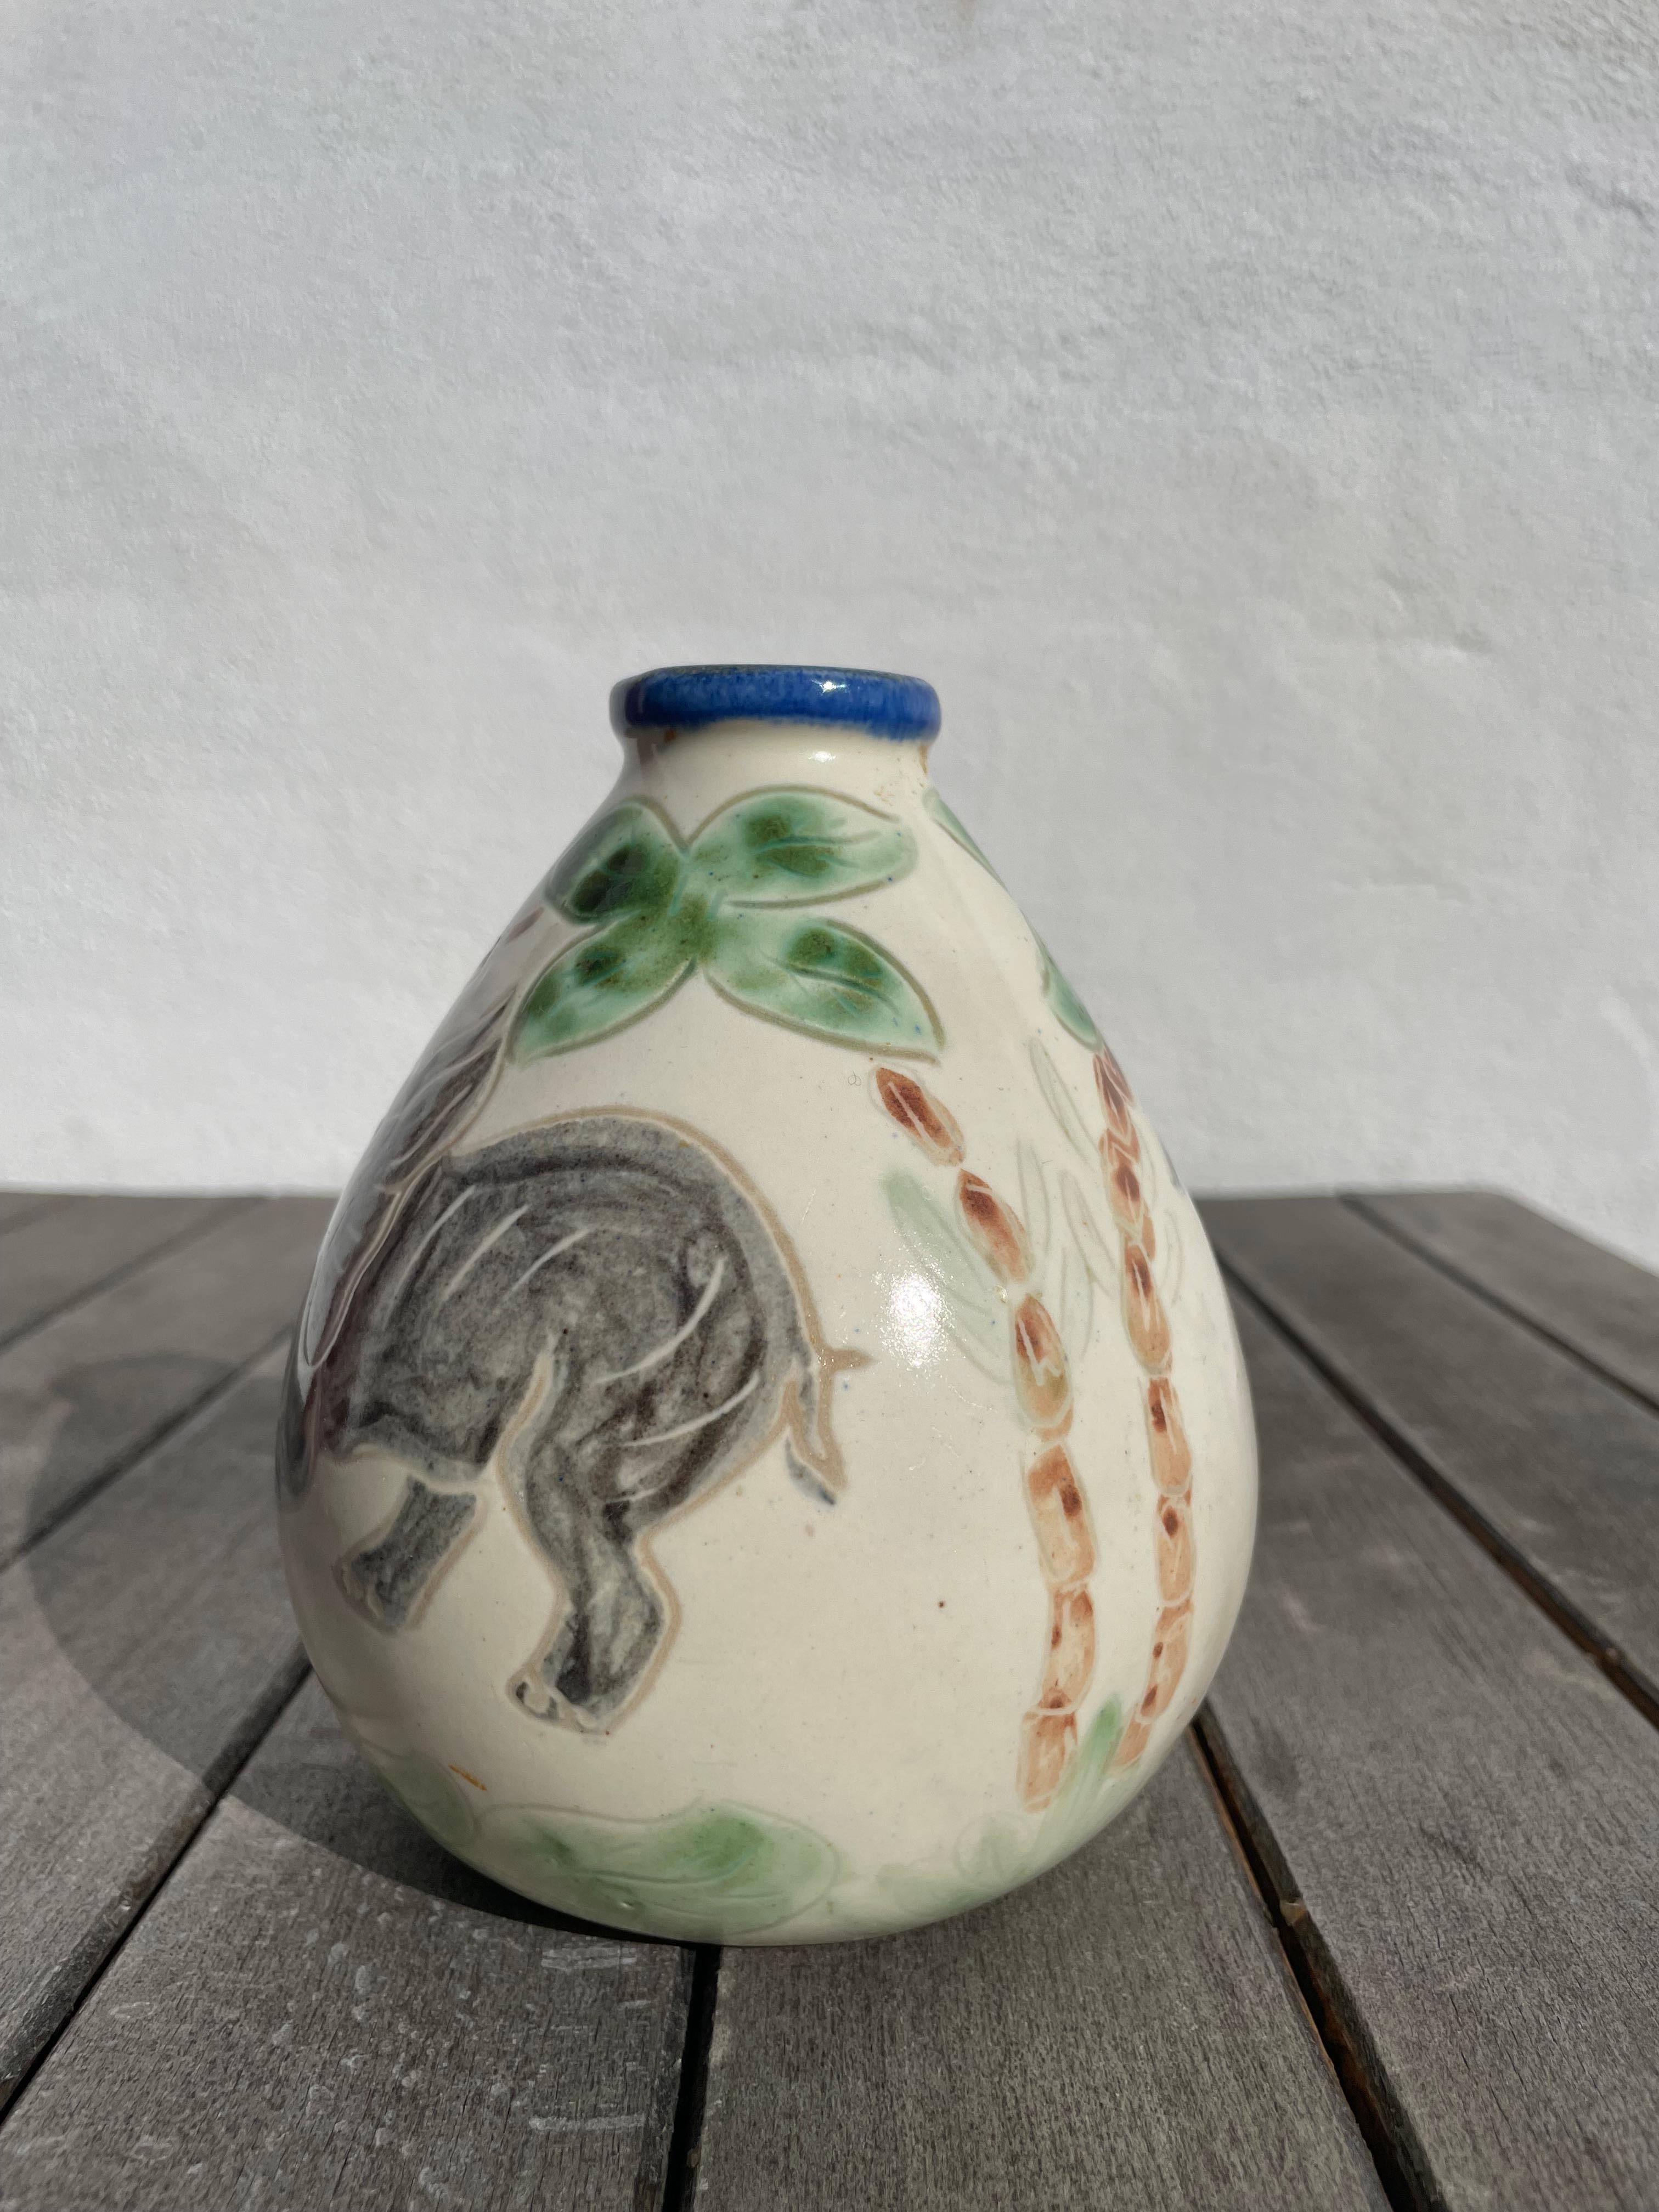 Danish soft shaped vase with hand-painted elephants and palmtrees. Light yellow glaze with blue top edge and green organic decor. Manufactured by Grimstrup Keramik. Signed and stamped under base. Beautiful vintage condition.
Denmark, 1950s.